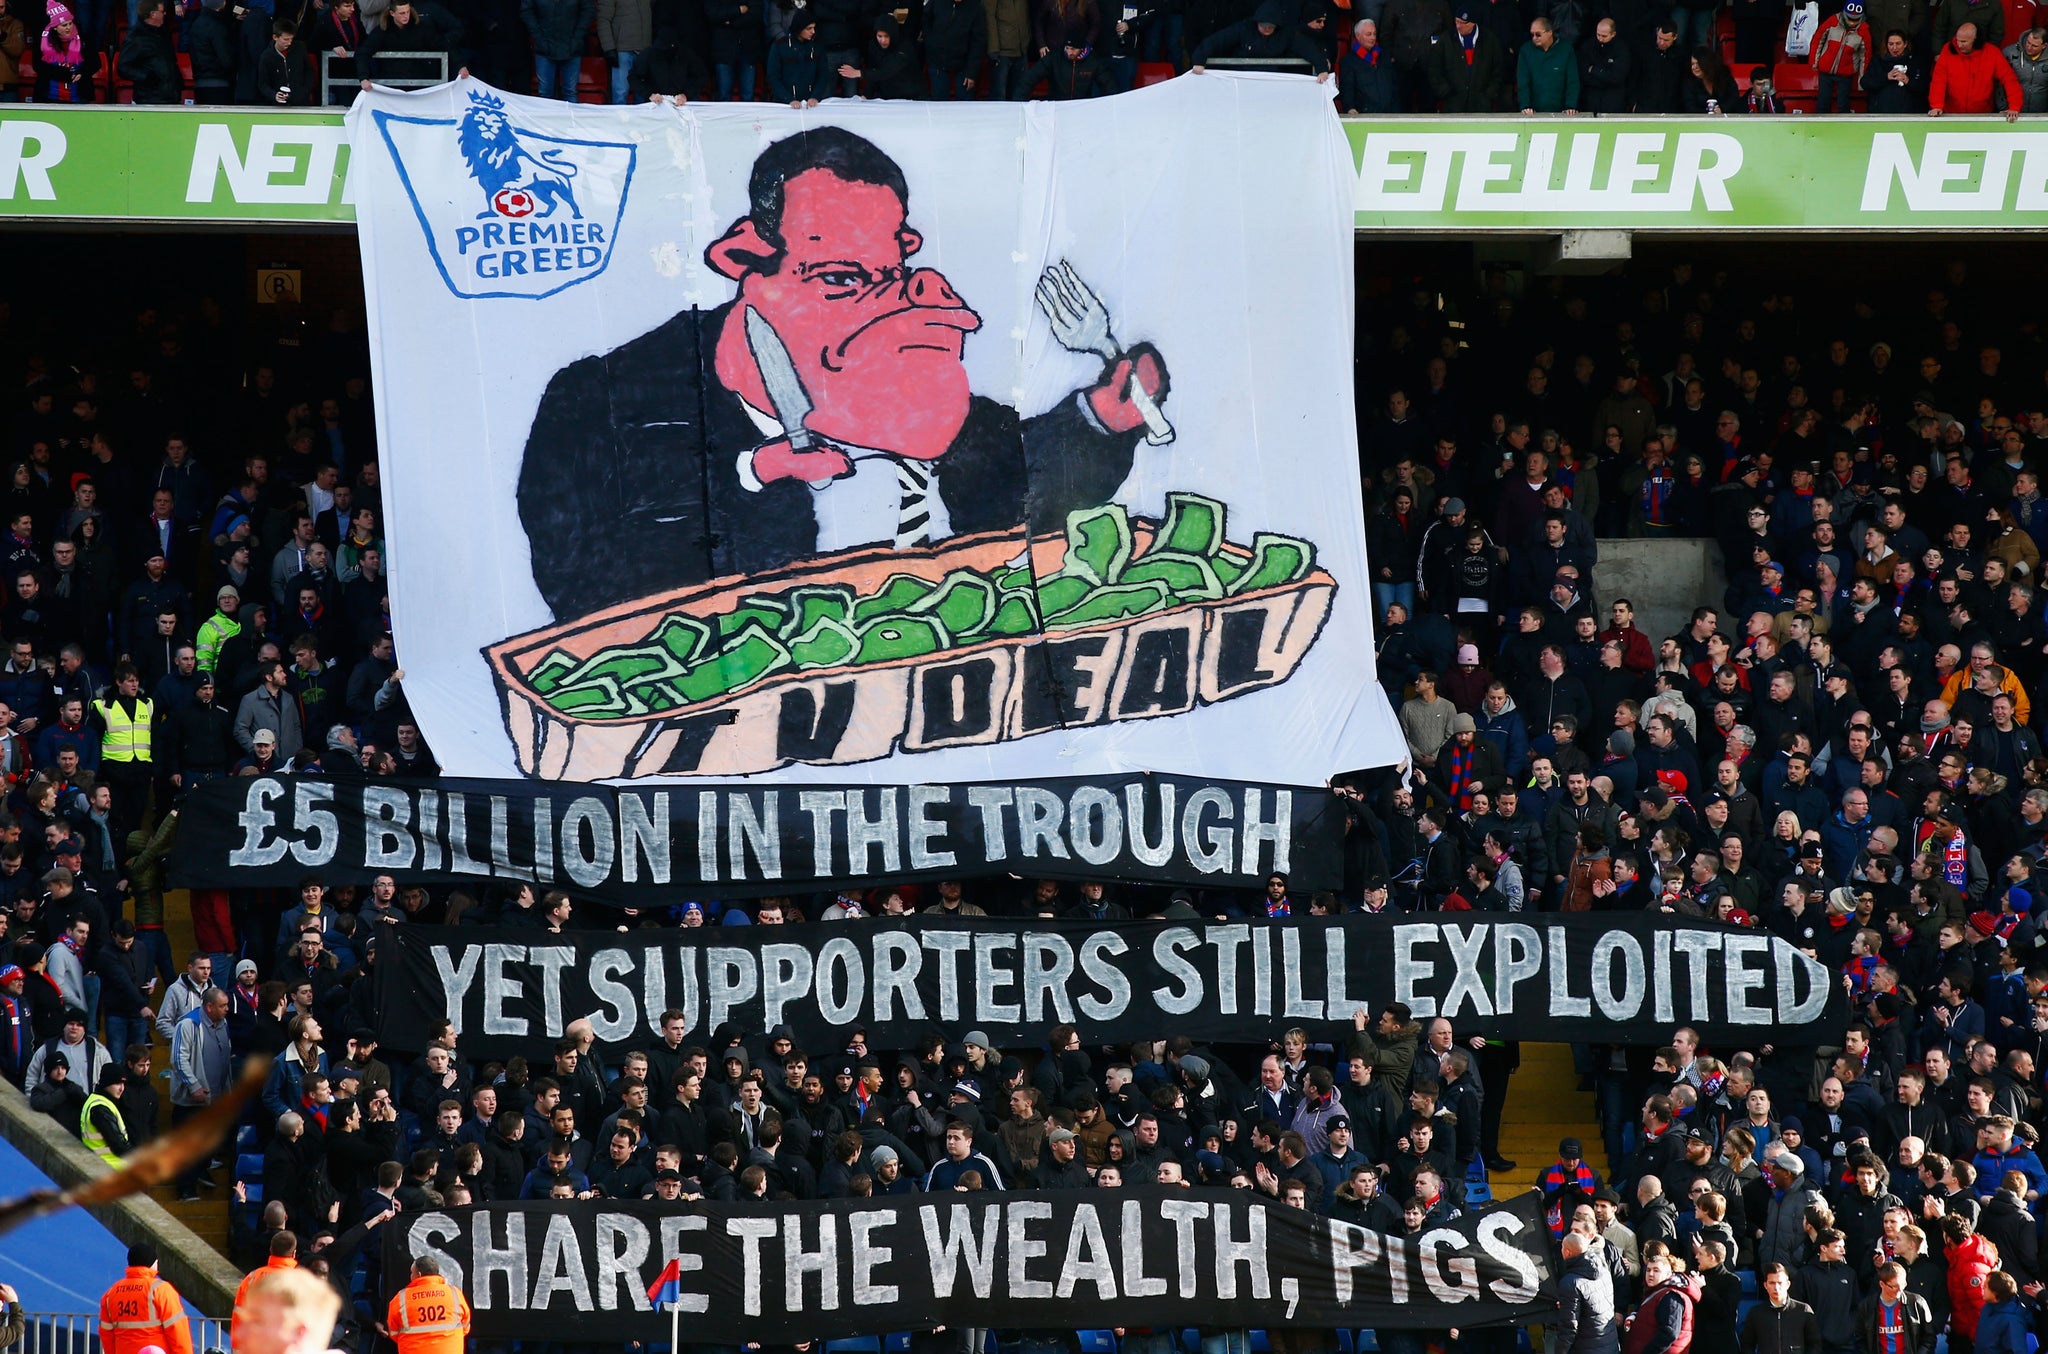 Palace fans unfurled a banner last week in protest